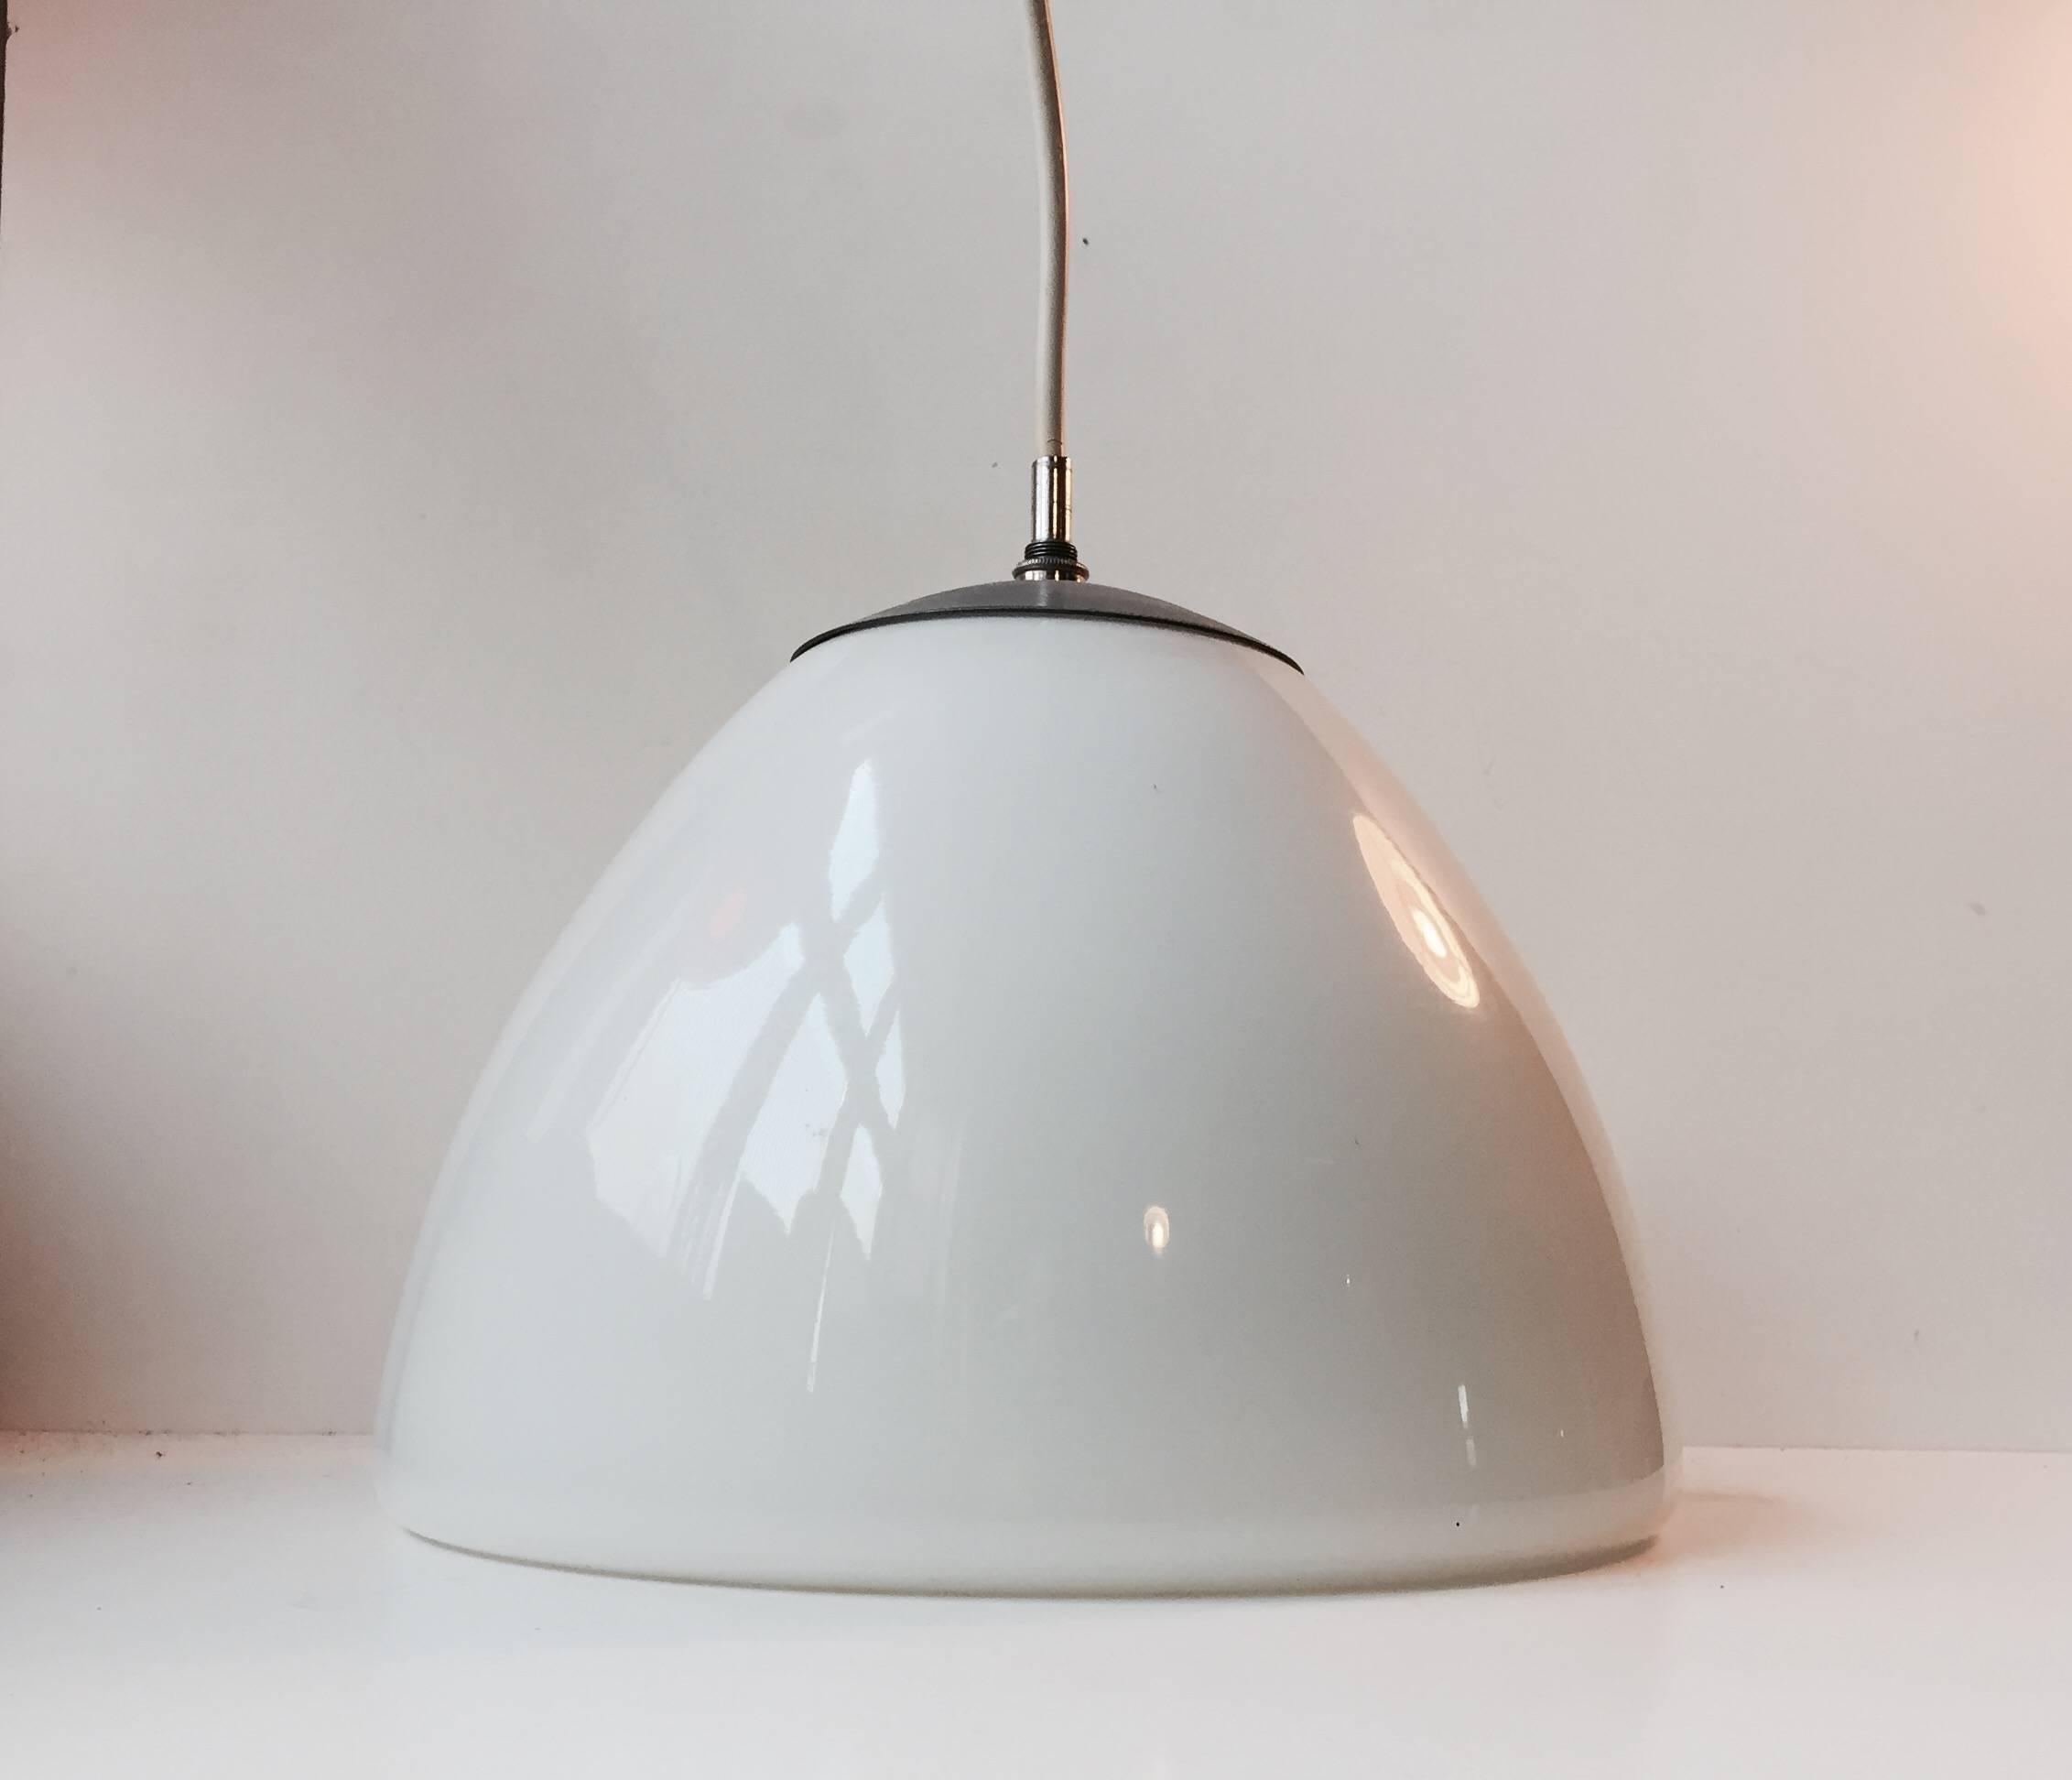 Art Deco styled white opal glass pendant lamp designed and manufactured by Louis Poulsen in Denmark during the 1960s. The design of this Light can possibly be related to Vilhelm Lauritzen but this remains unsudden.